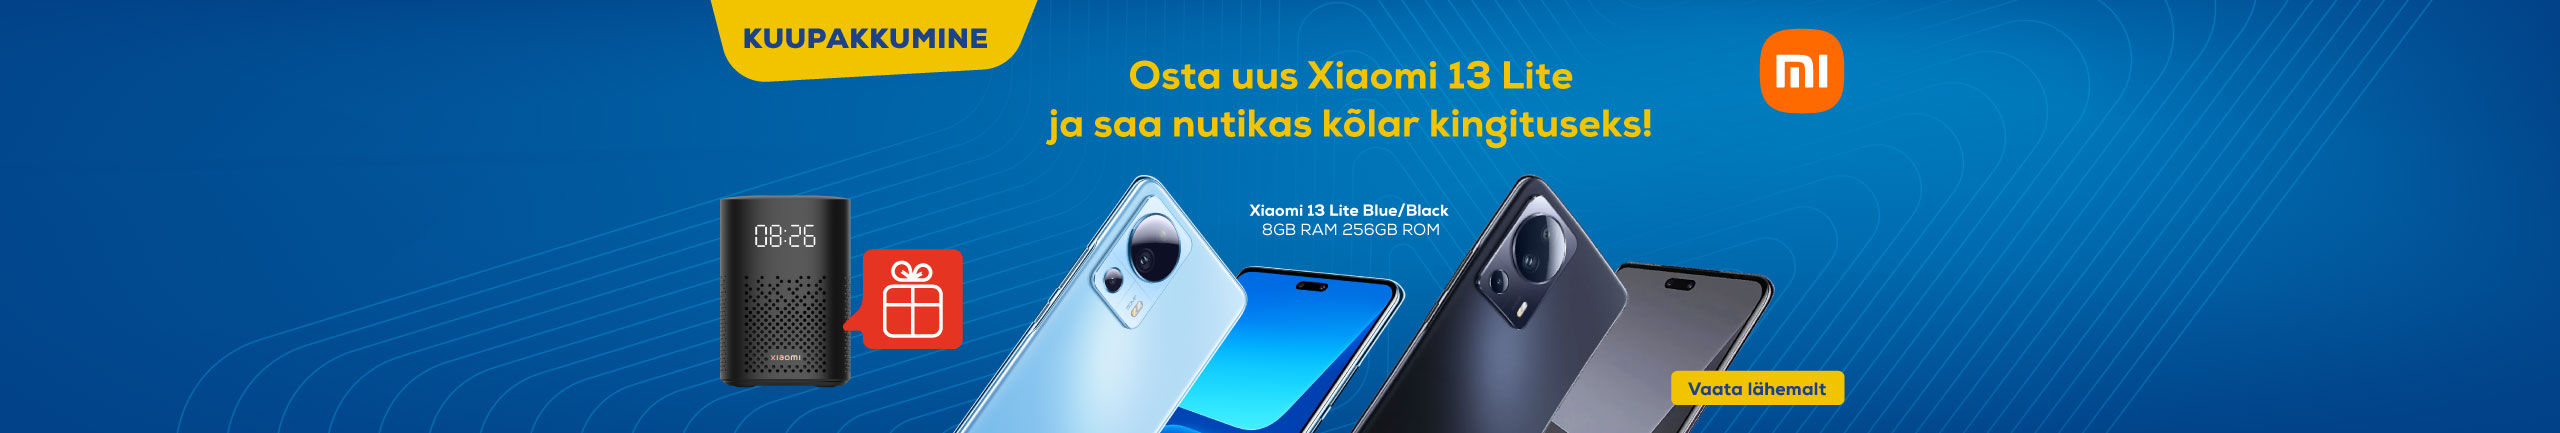 Buy the new Xiaomi 13 Lite smartphone and get smart speaker as a complimentary gift!